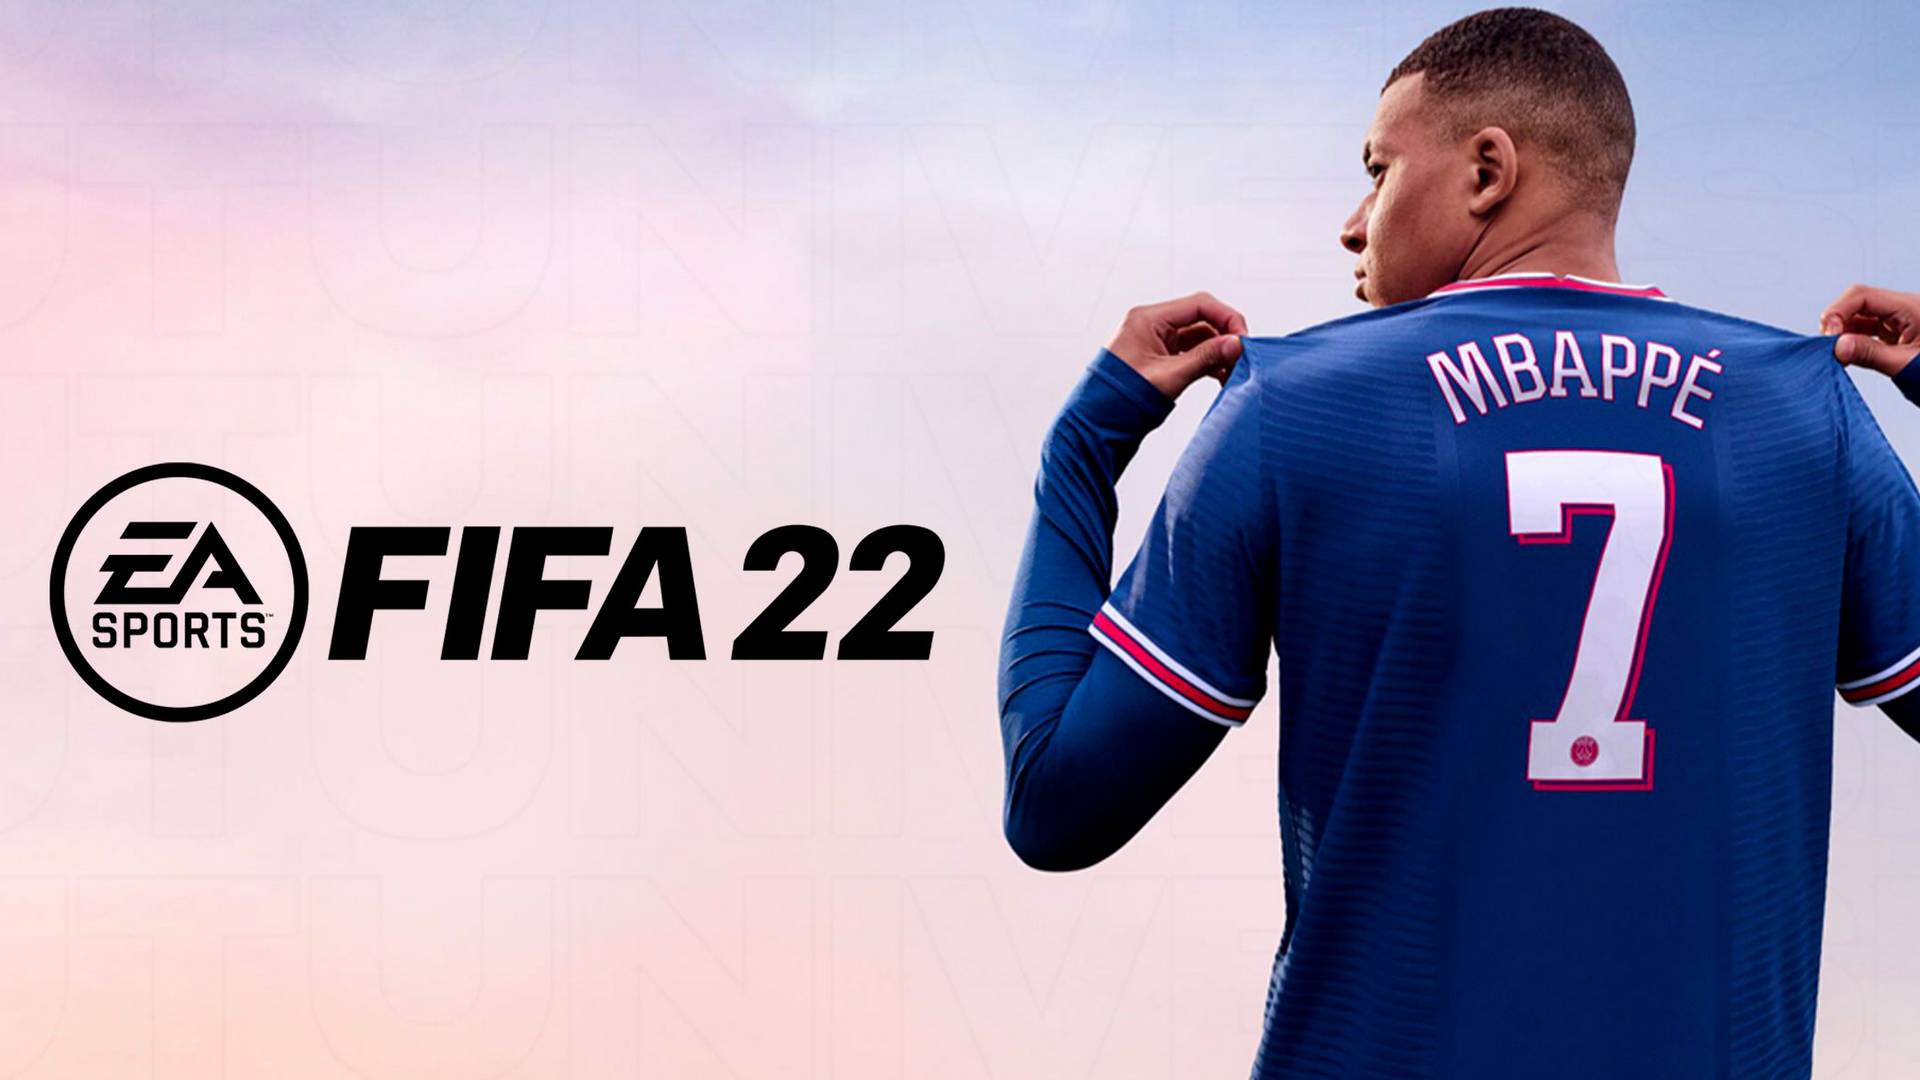 FIFA 22 op Xbox Game Pass?  Microsoft Store-informatie is te oud |  Xbox One